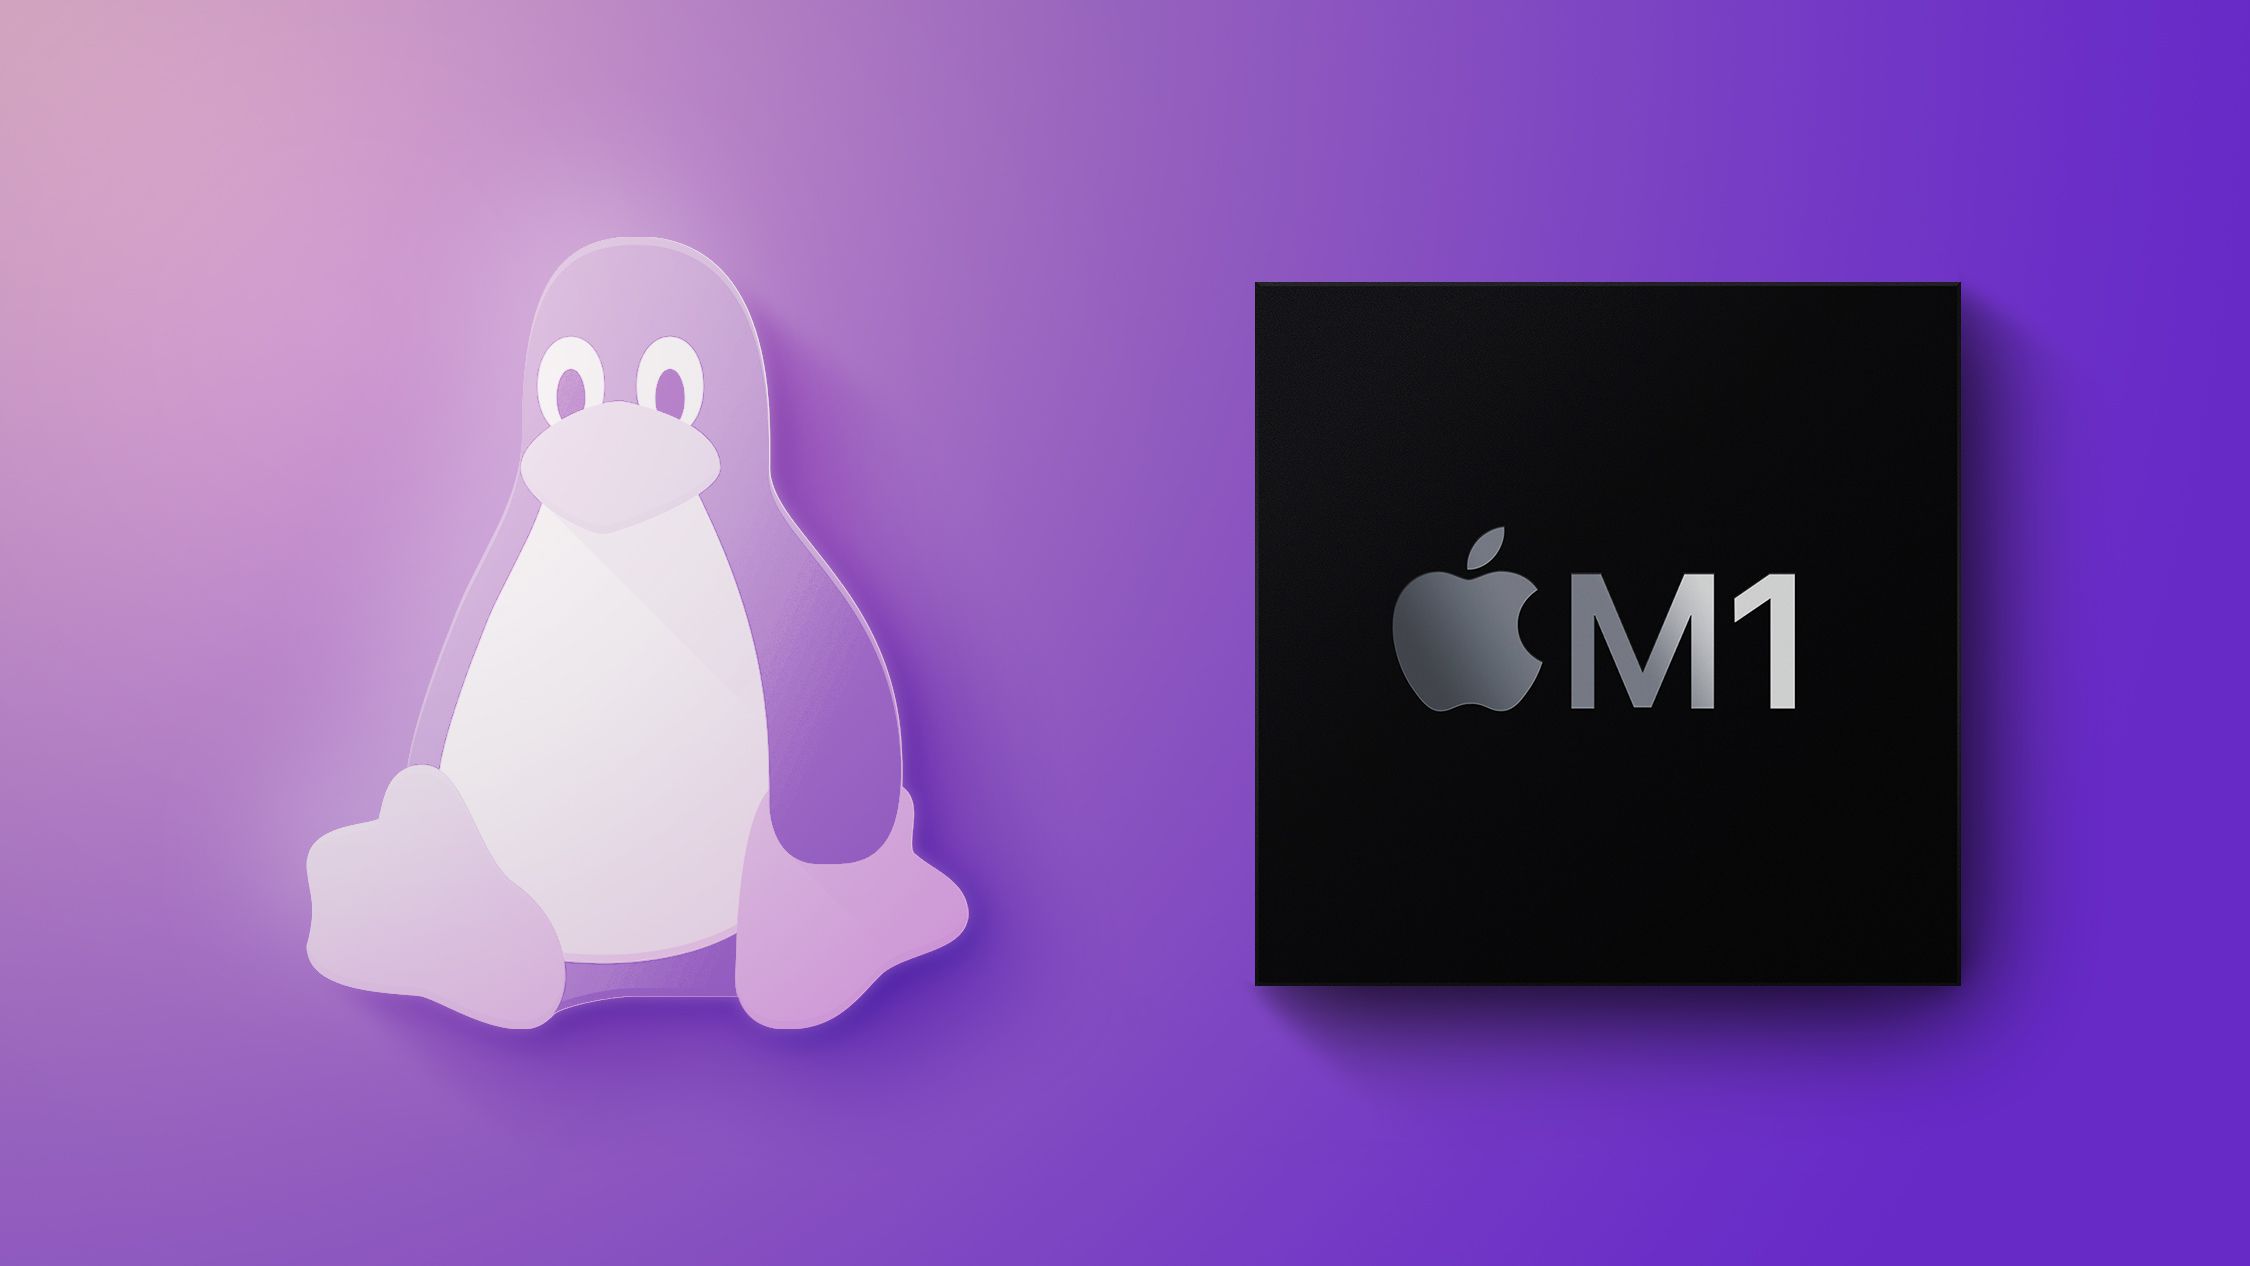 Corellium launches the “fully usable” version of Linux for M1 Macs